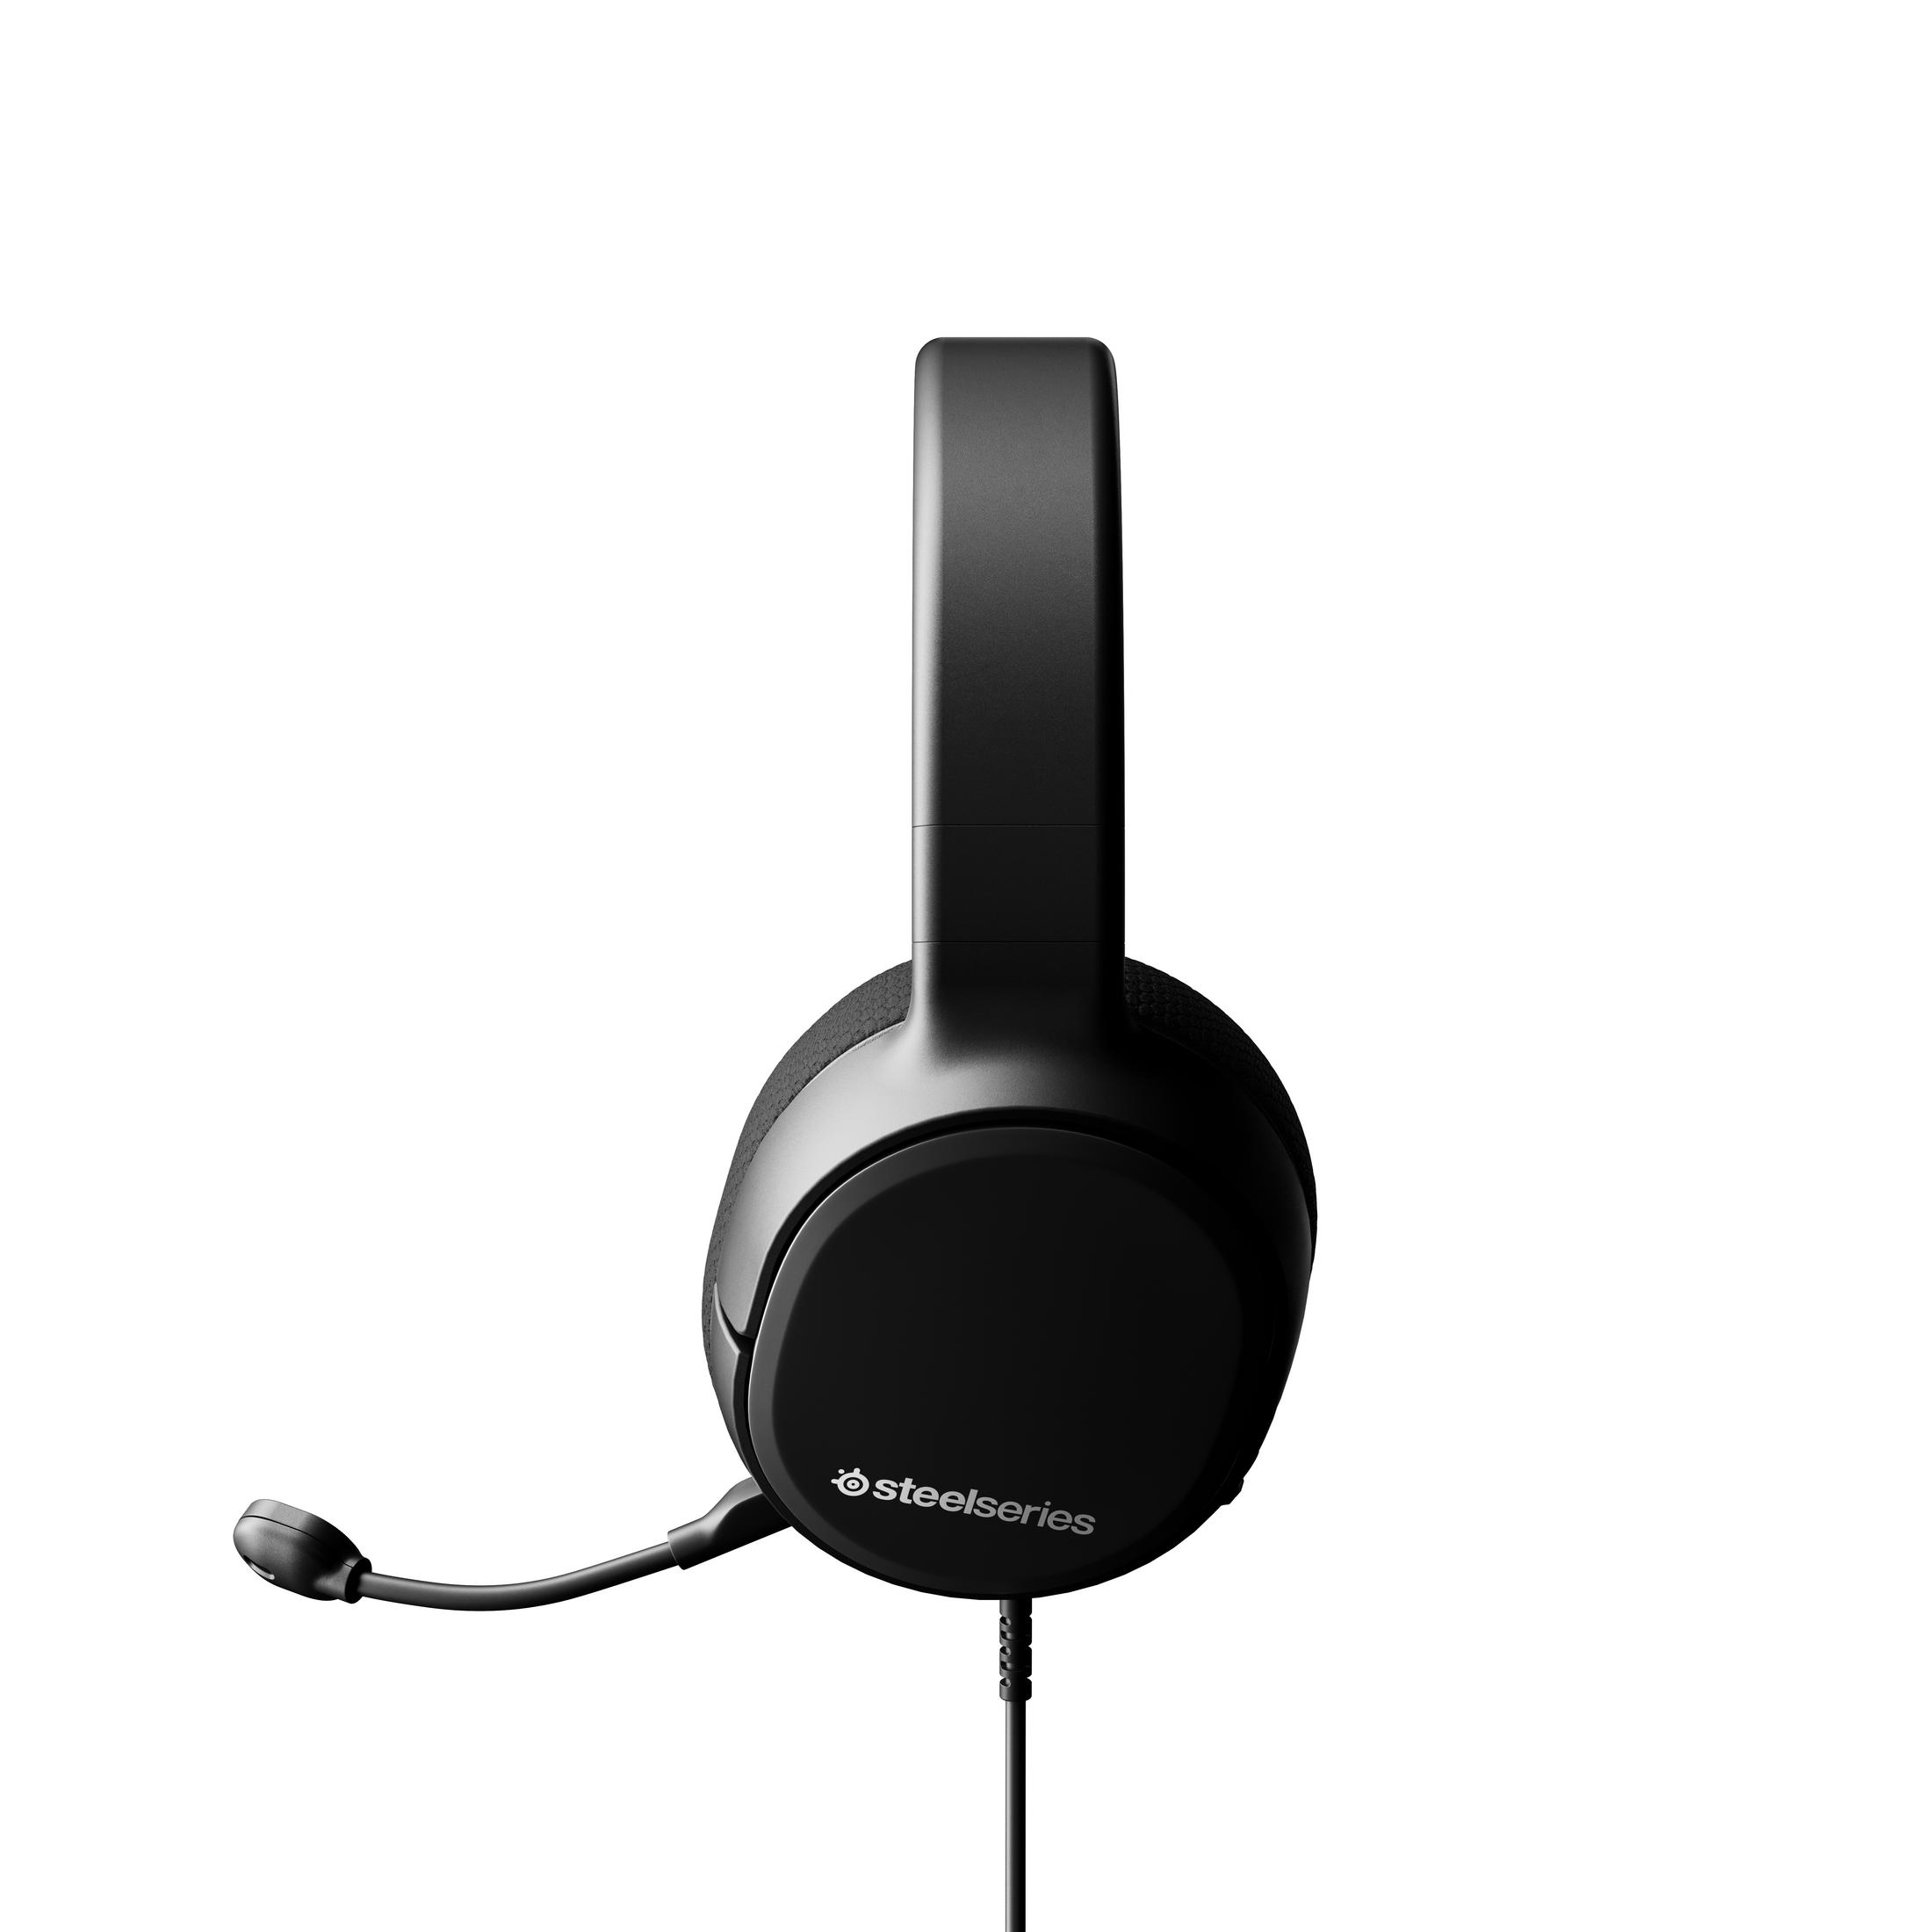 GAMINGHEADSET, WIRED 1 61427 ARCTIS ALL-PLATFORM Headset Schwarz Gaming STEELSERIES Over-ear